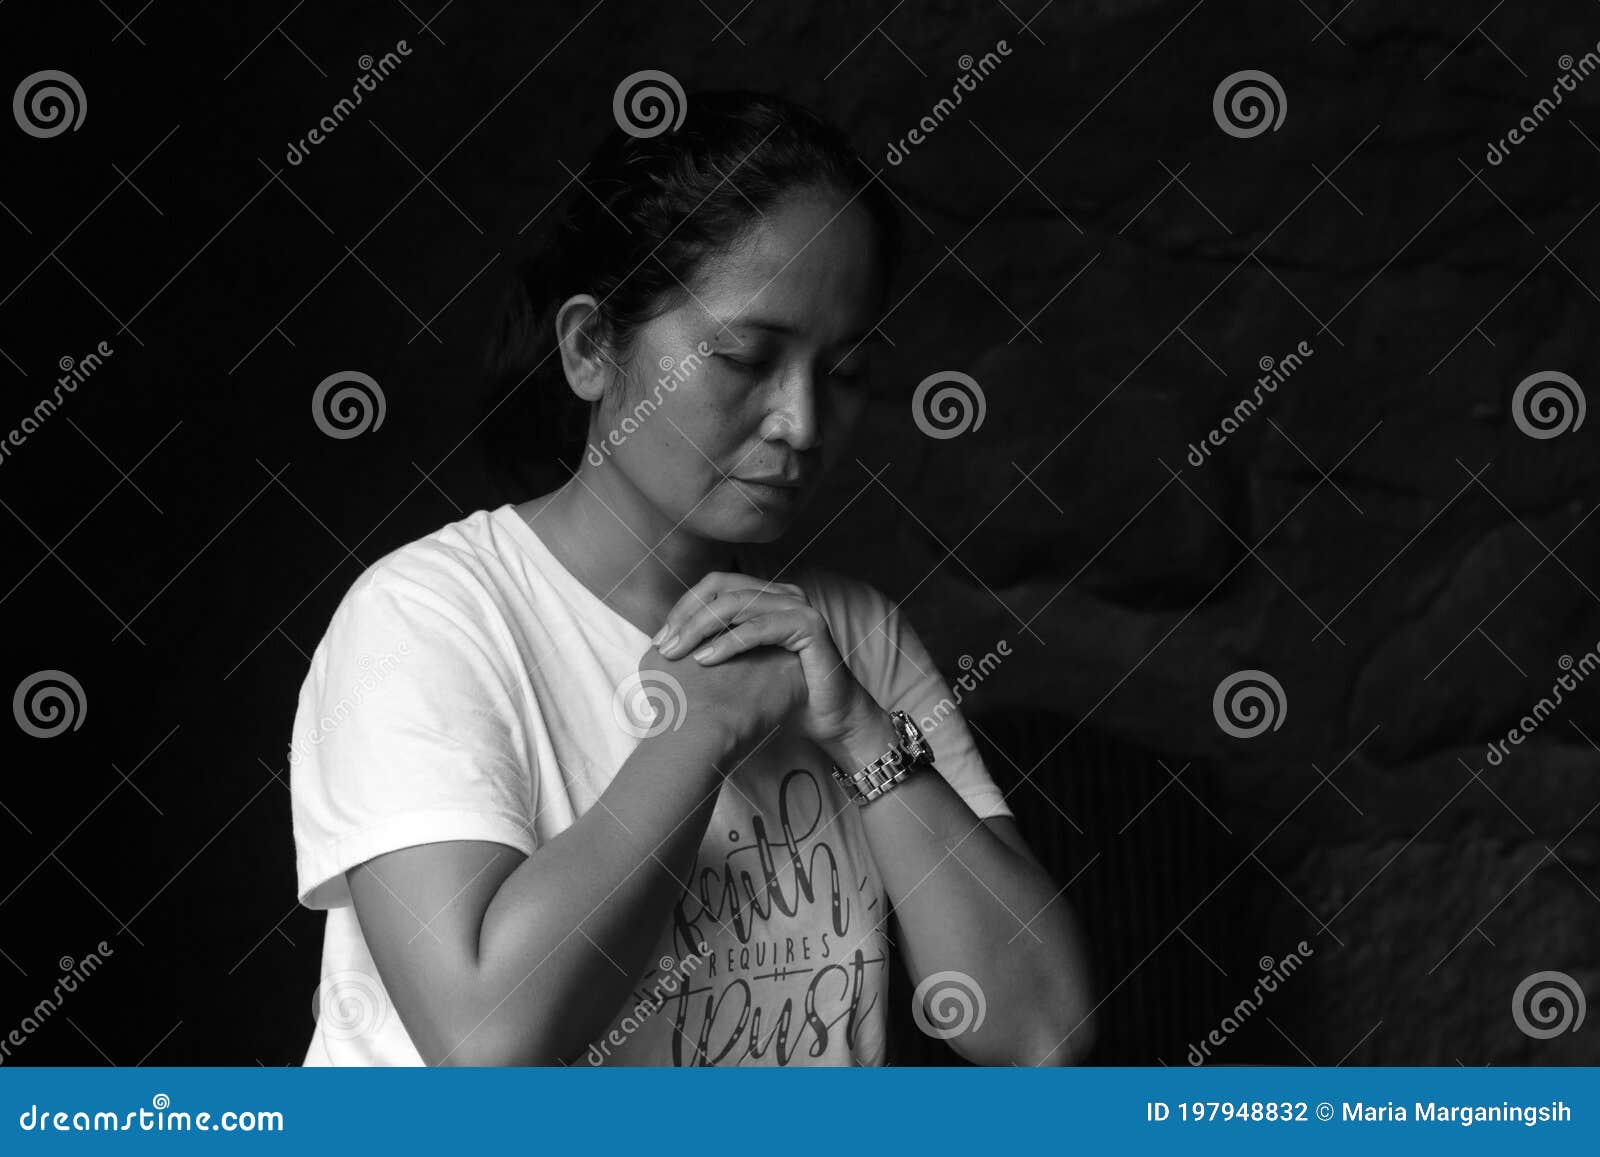 Royalty-Free photo: Woman in white top pose for photo while hand on her  neck | PickPik